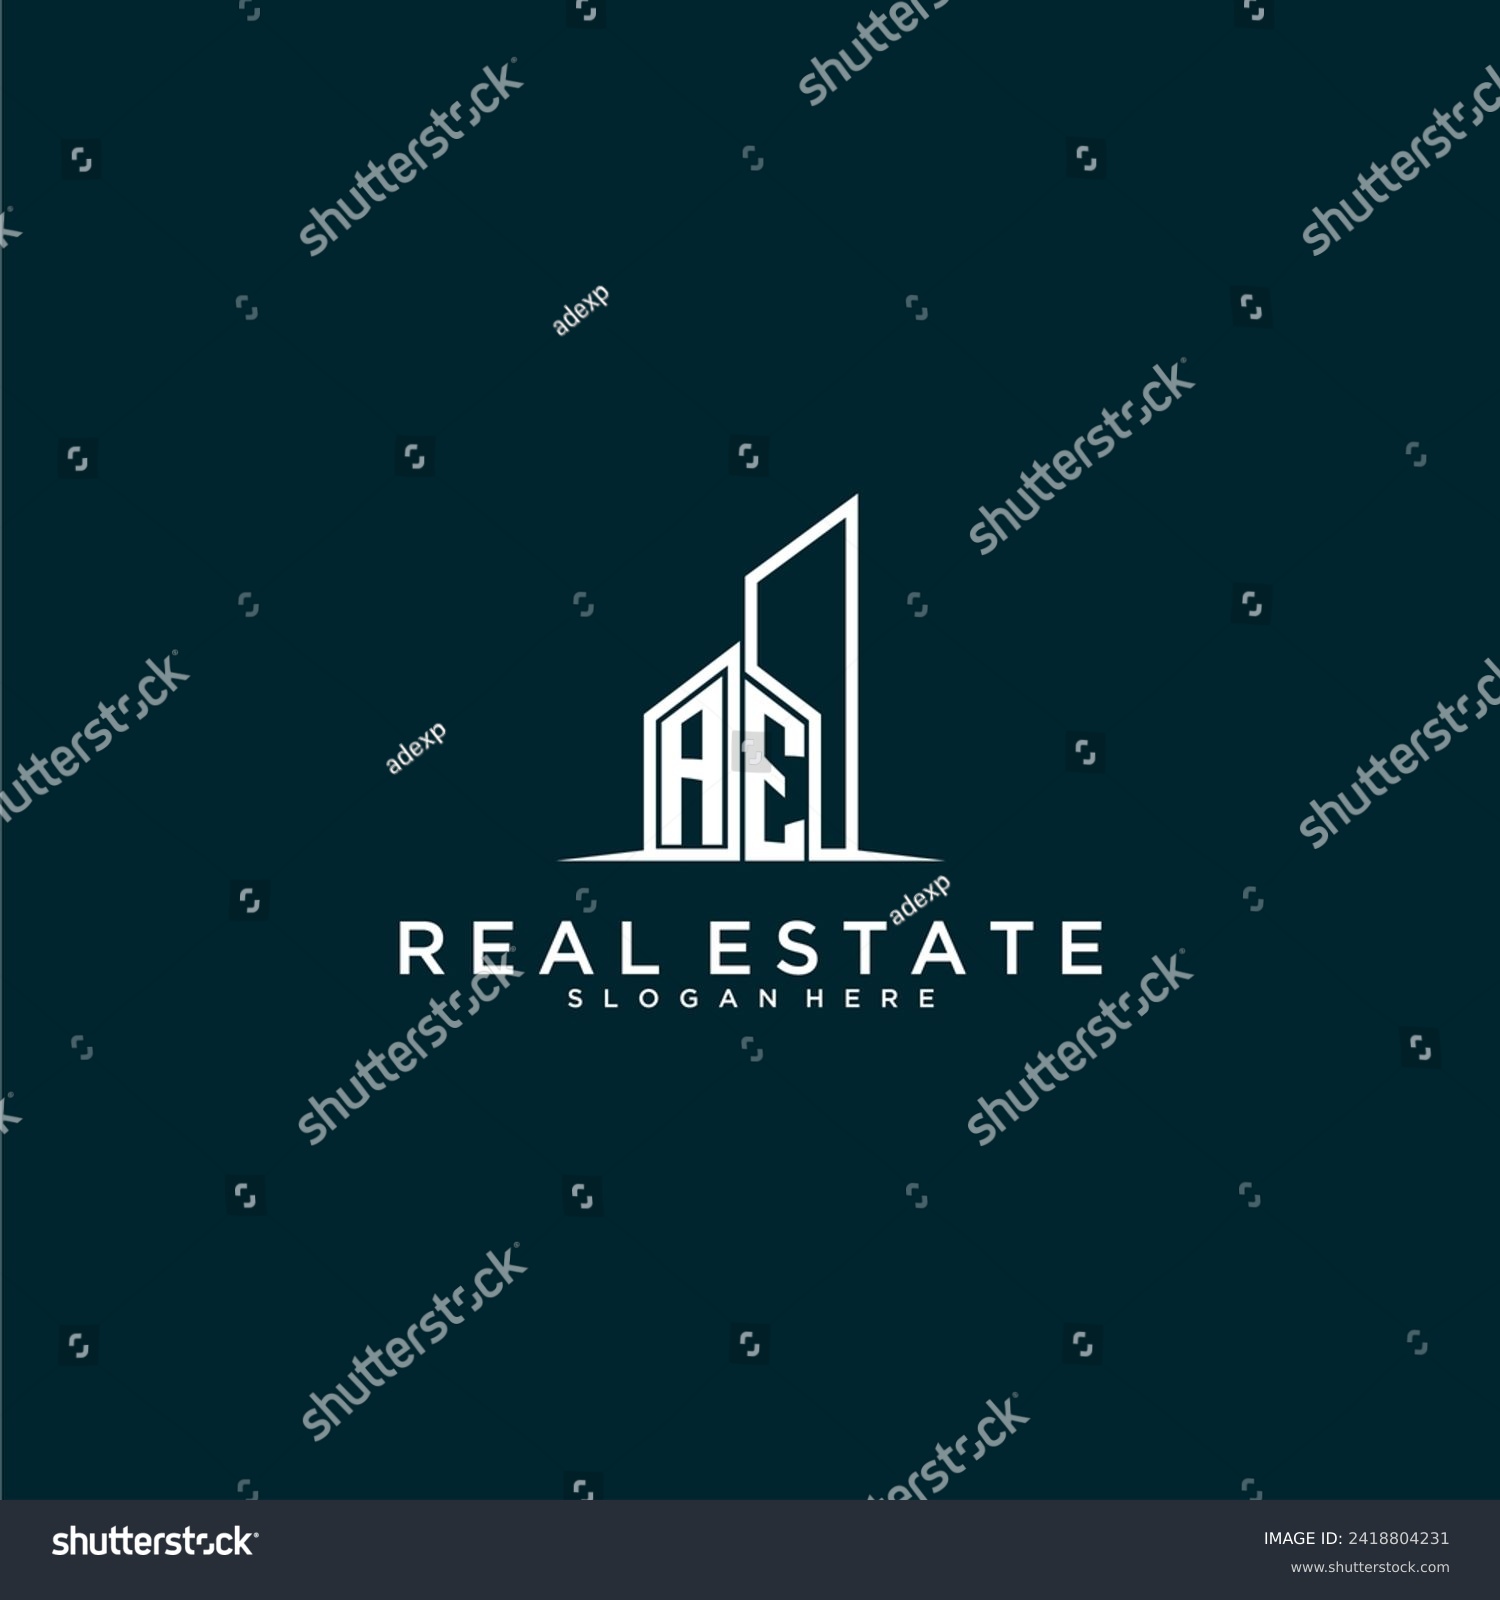 SVG of AE initial monogram logo real estate with building style design vector svg